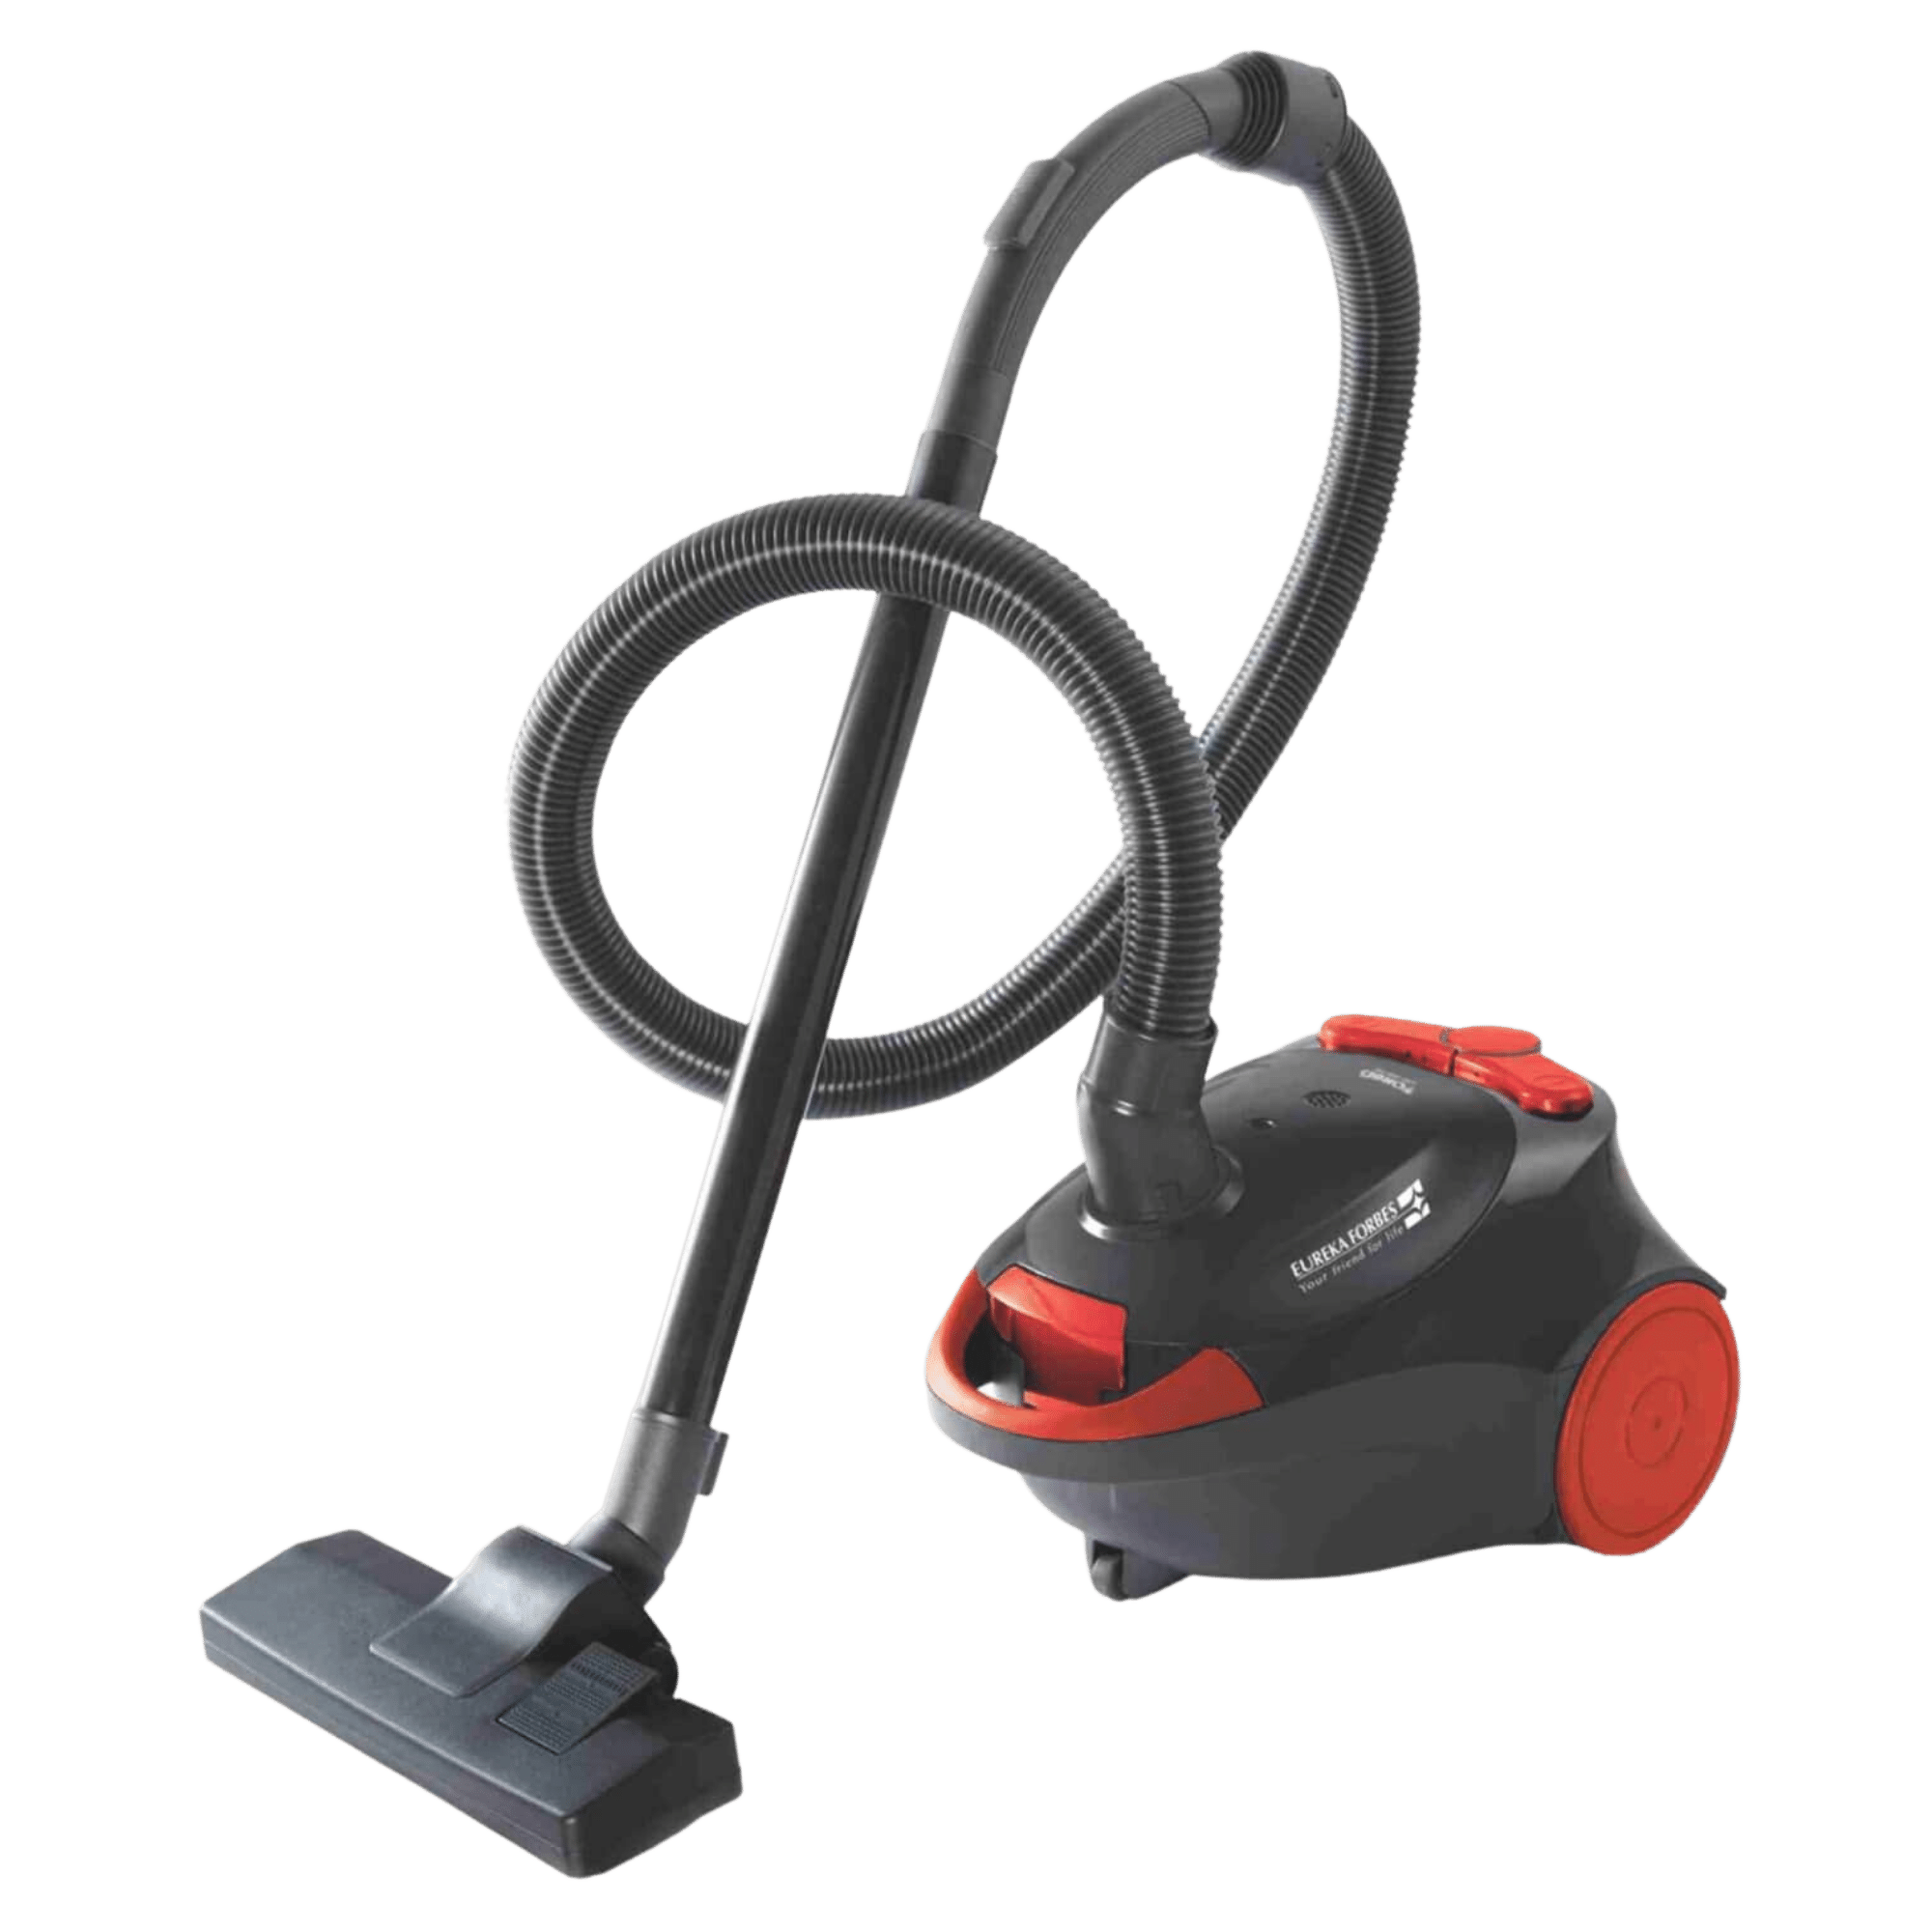 Clean Smarter, Not Harder Today Eureka Dry Vacuum